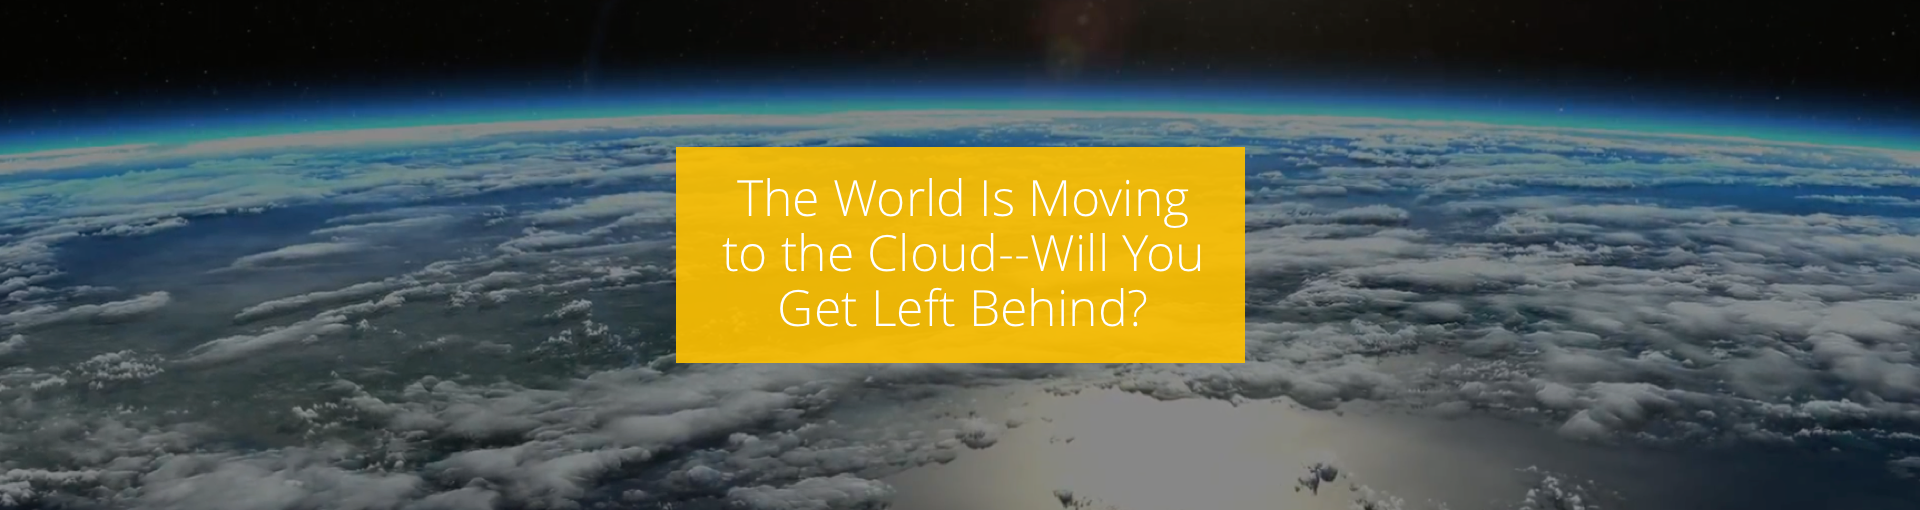 The World Is Moving to the Cloud--Will You Get Left Behind? Featured Image